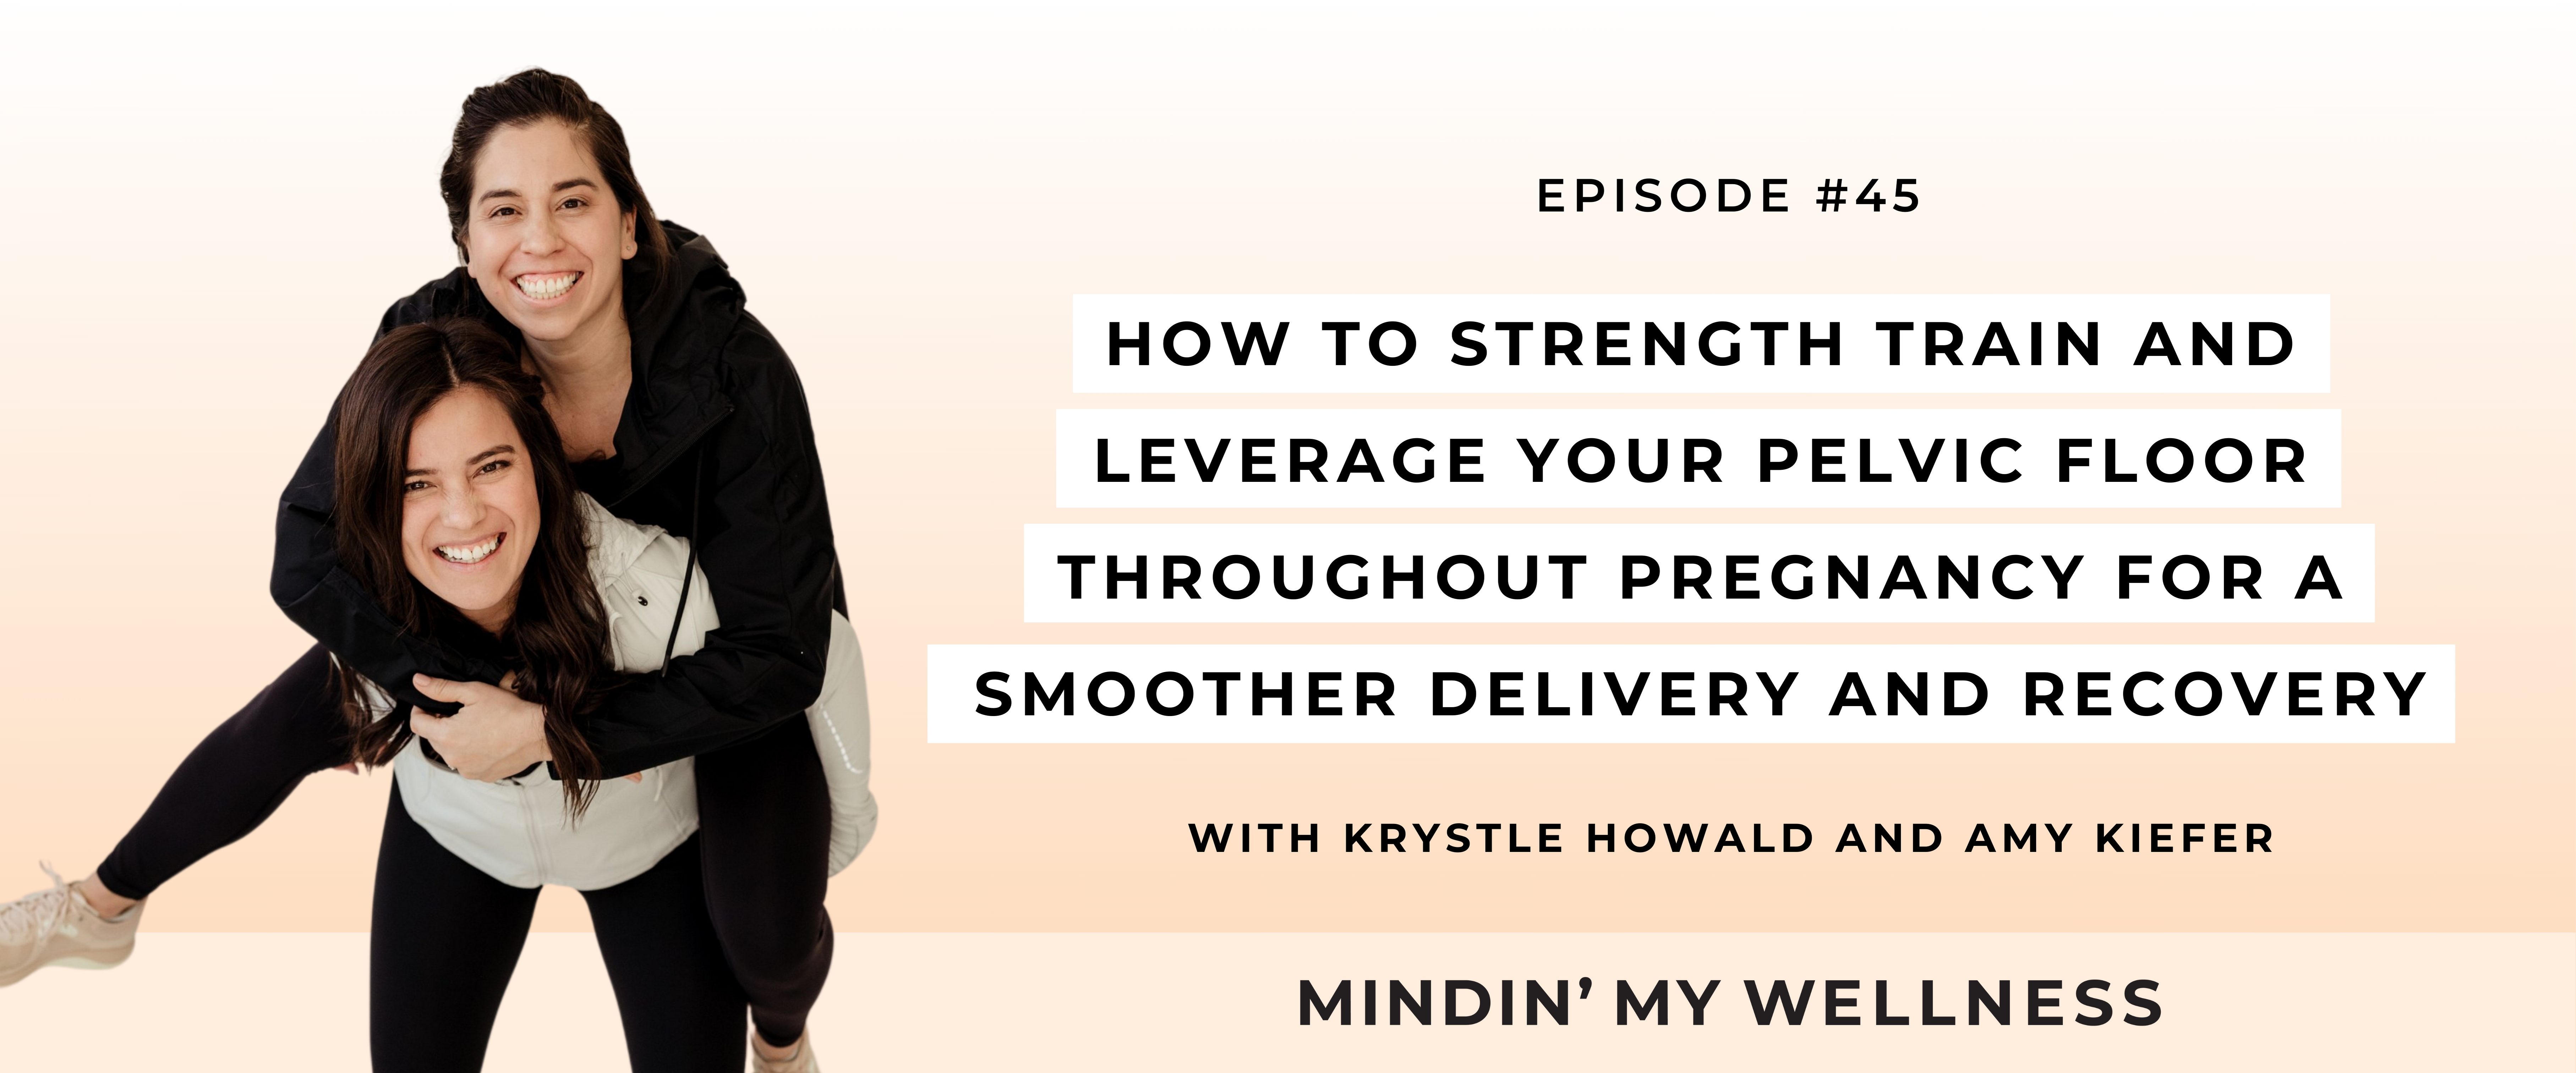 How to Strength Train and Leverage Your Pelvic Floor Throughout Pregnancy For a Smoother Delivery and Recovery